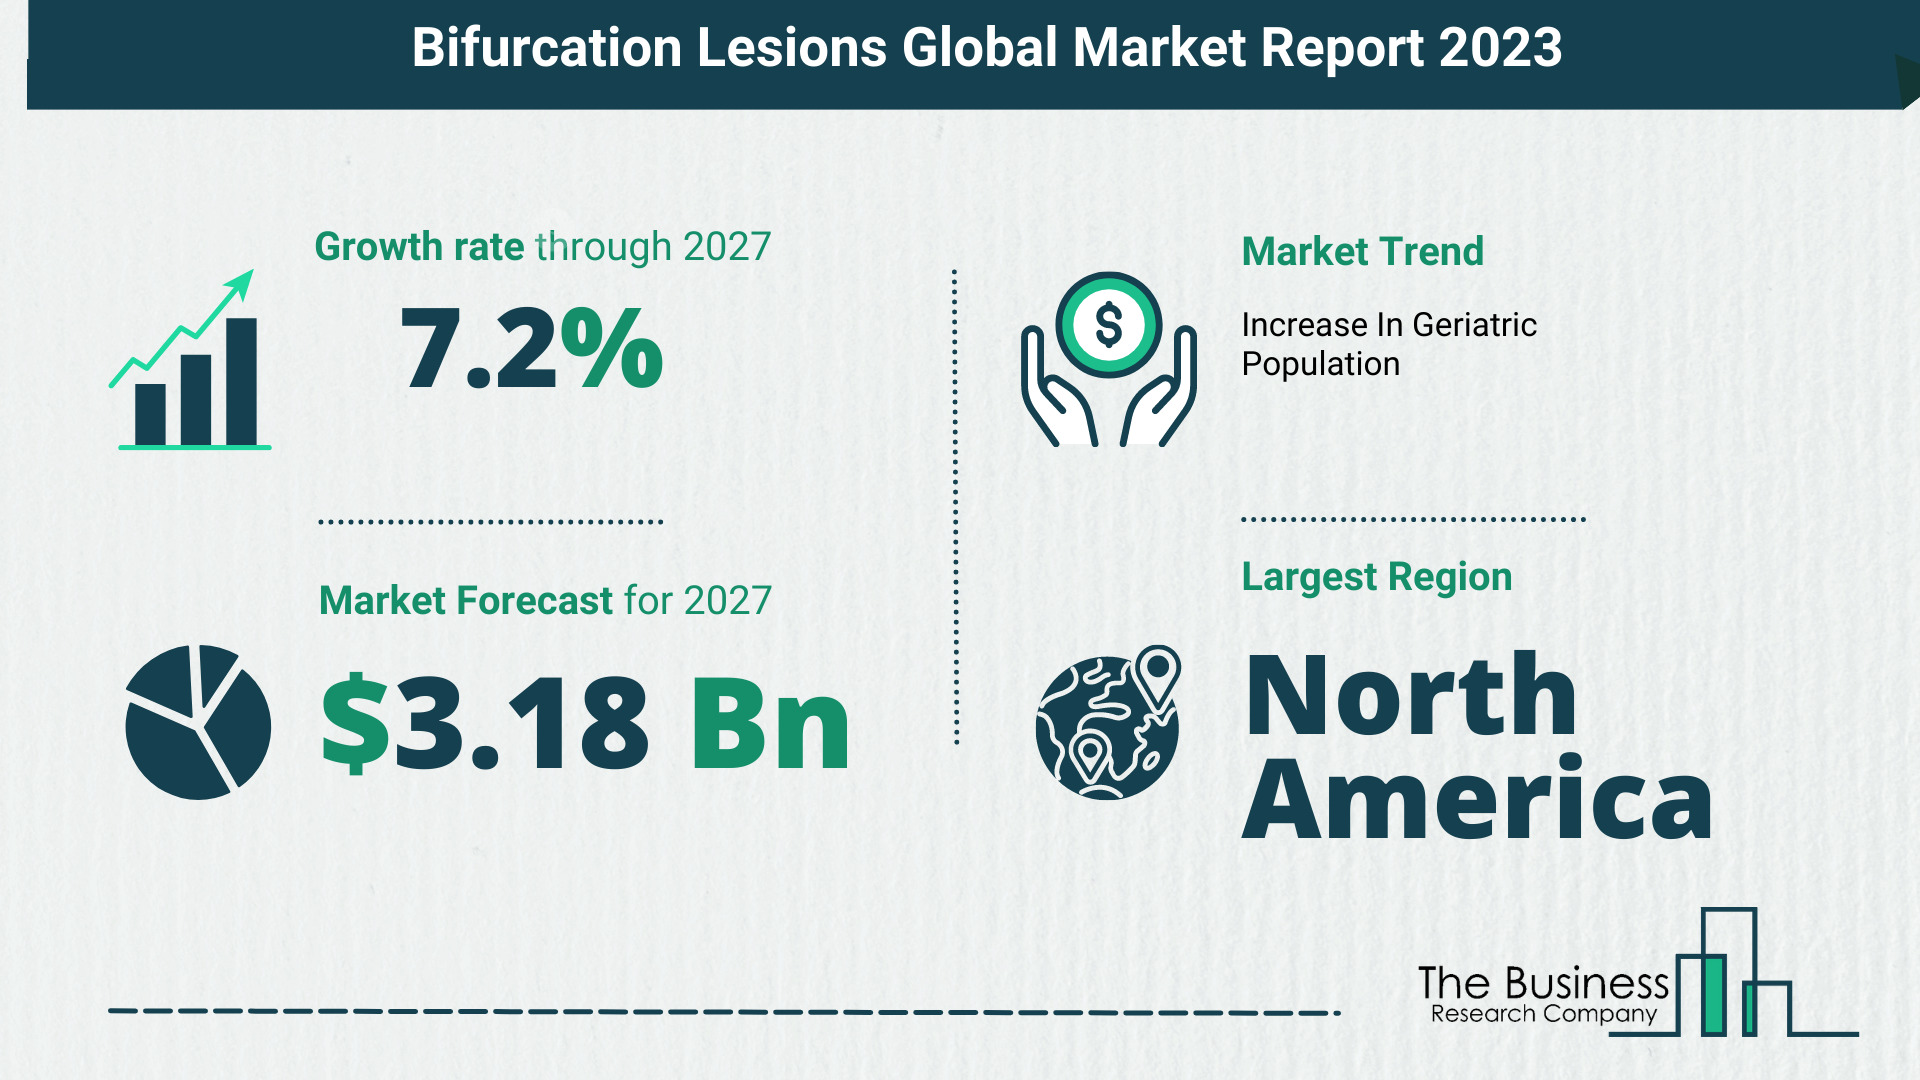 How Will The Bifurcation Lesions Market Size Grow In The Coming Years?